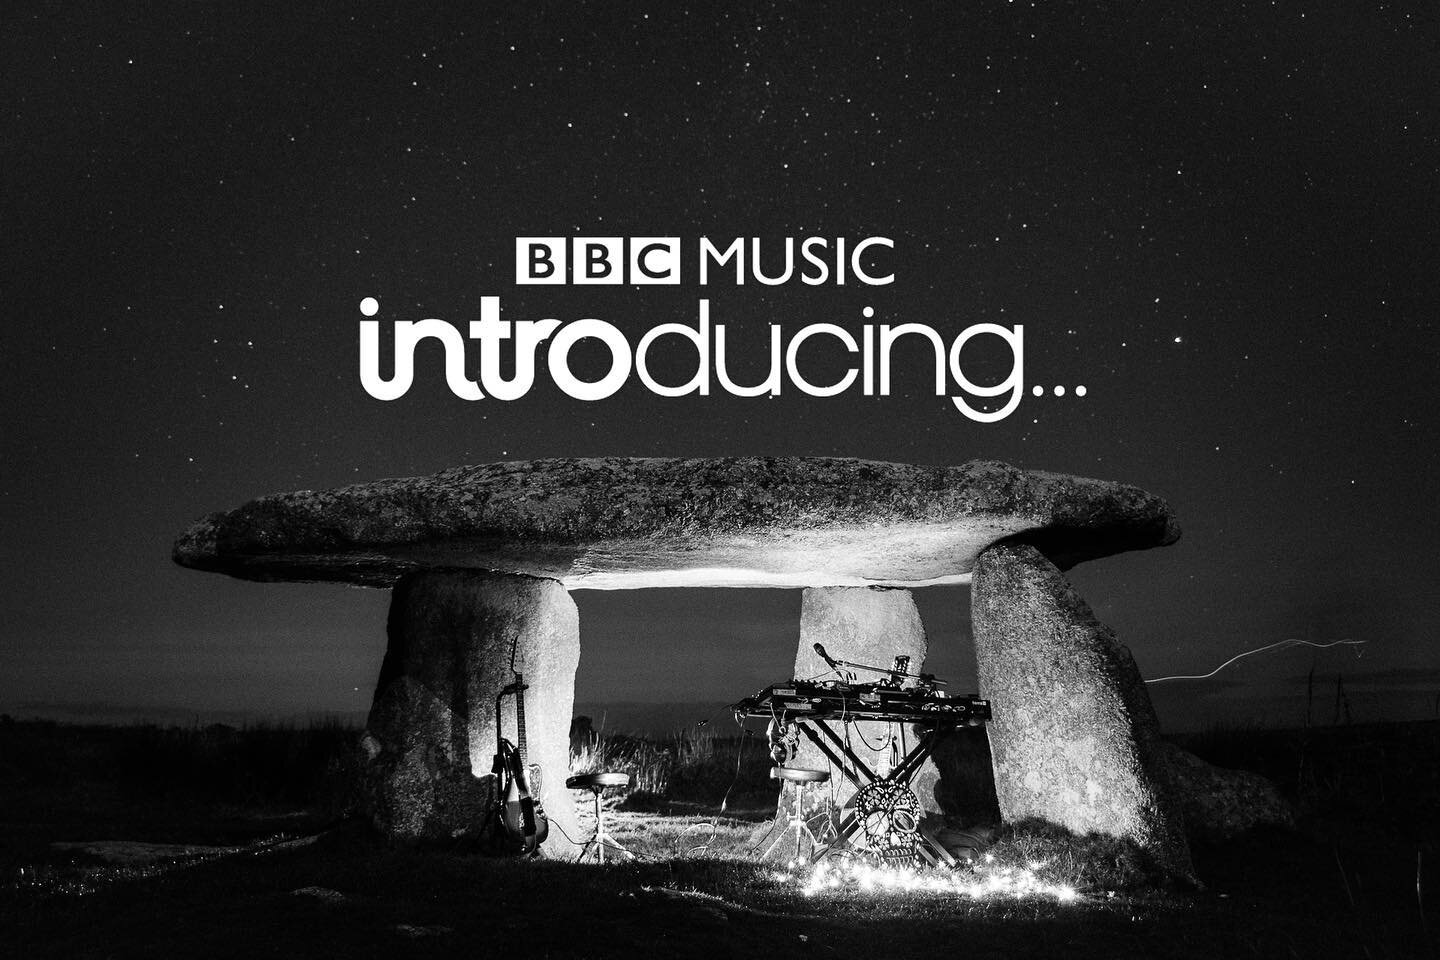 Tune into @bbcintrosw tonight from 8pm if you fancy hearing Natty stardust conjure six string spells while I howl at the granite moon 🌙 

🏴&zwj;☠️ @ablazeoffeather 
🎥 @wil_bot 

#bbcintroducing 
#ablazeoffeather
#natwason 
#kernow
#starlight
#quoi